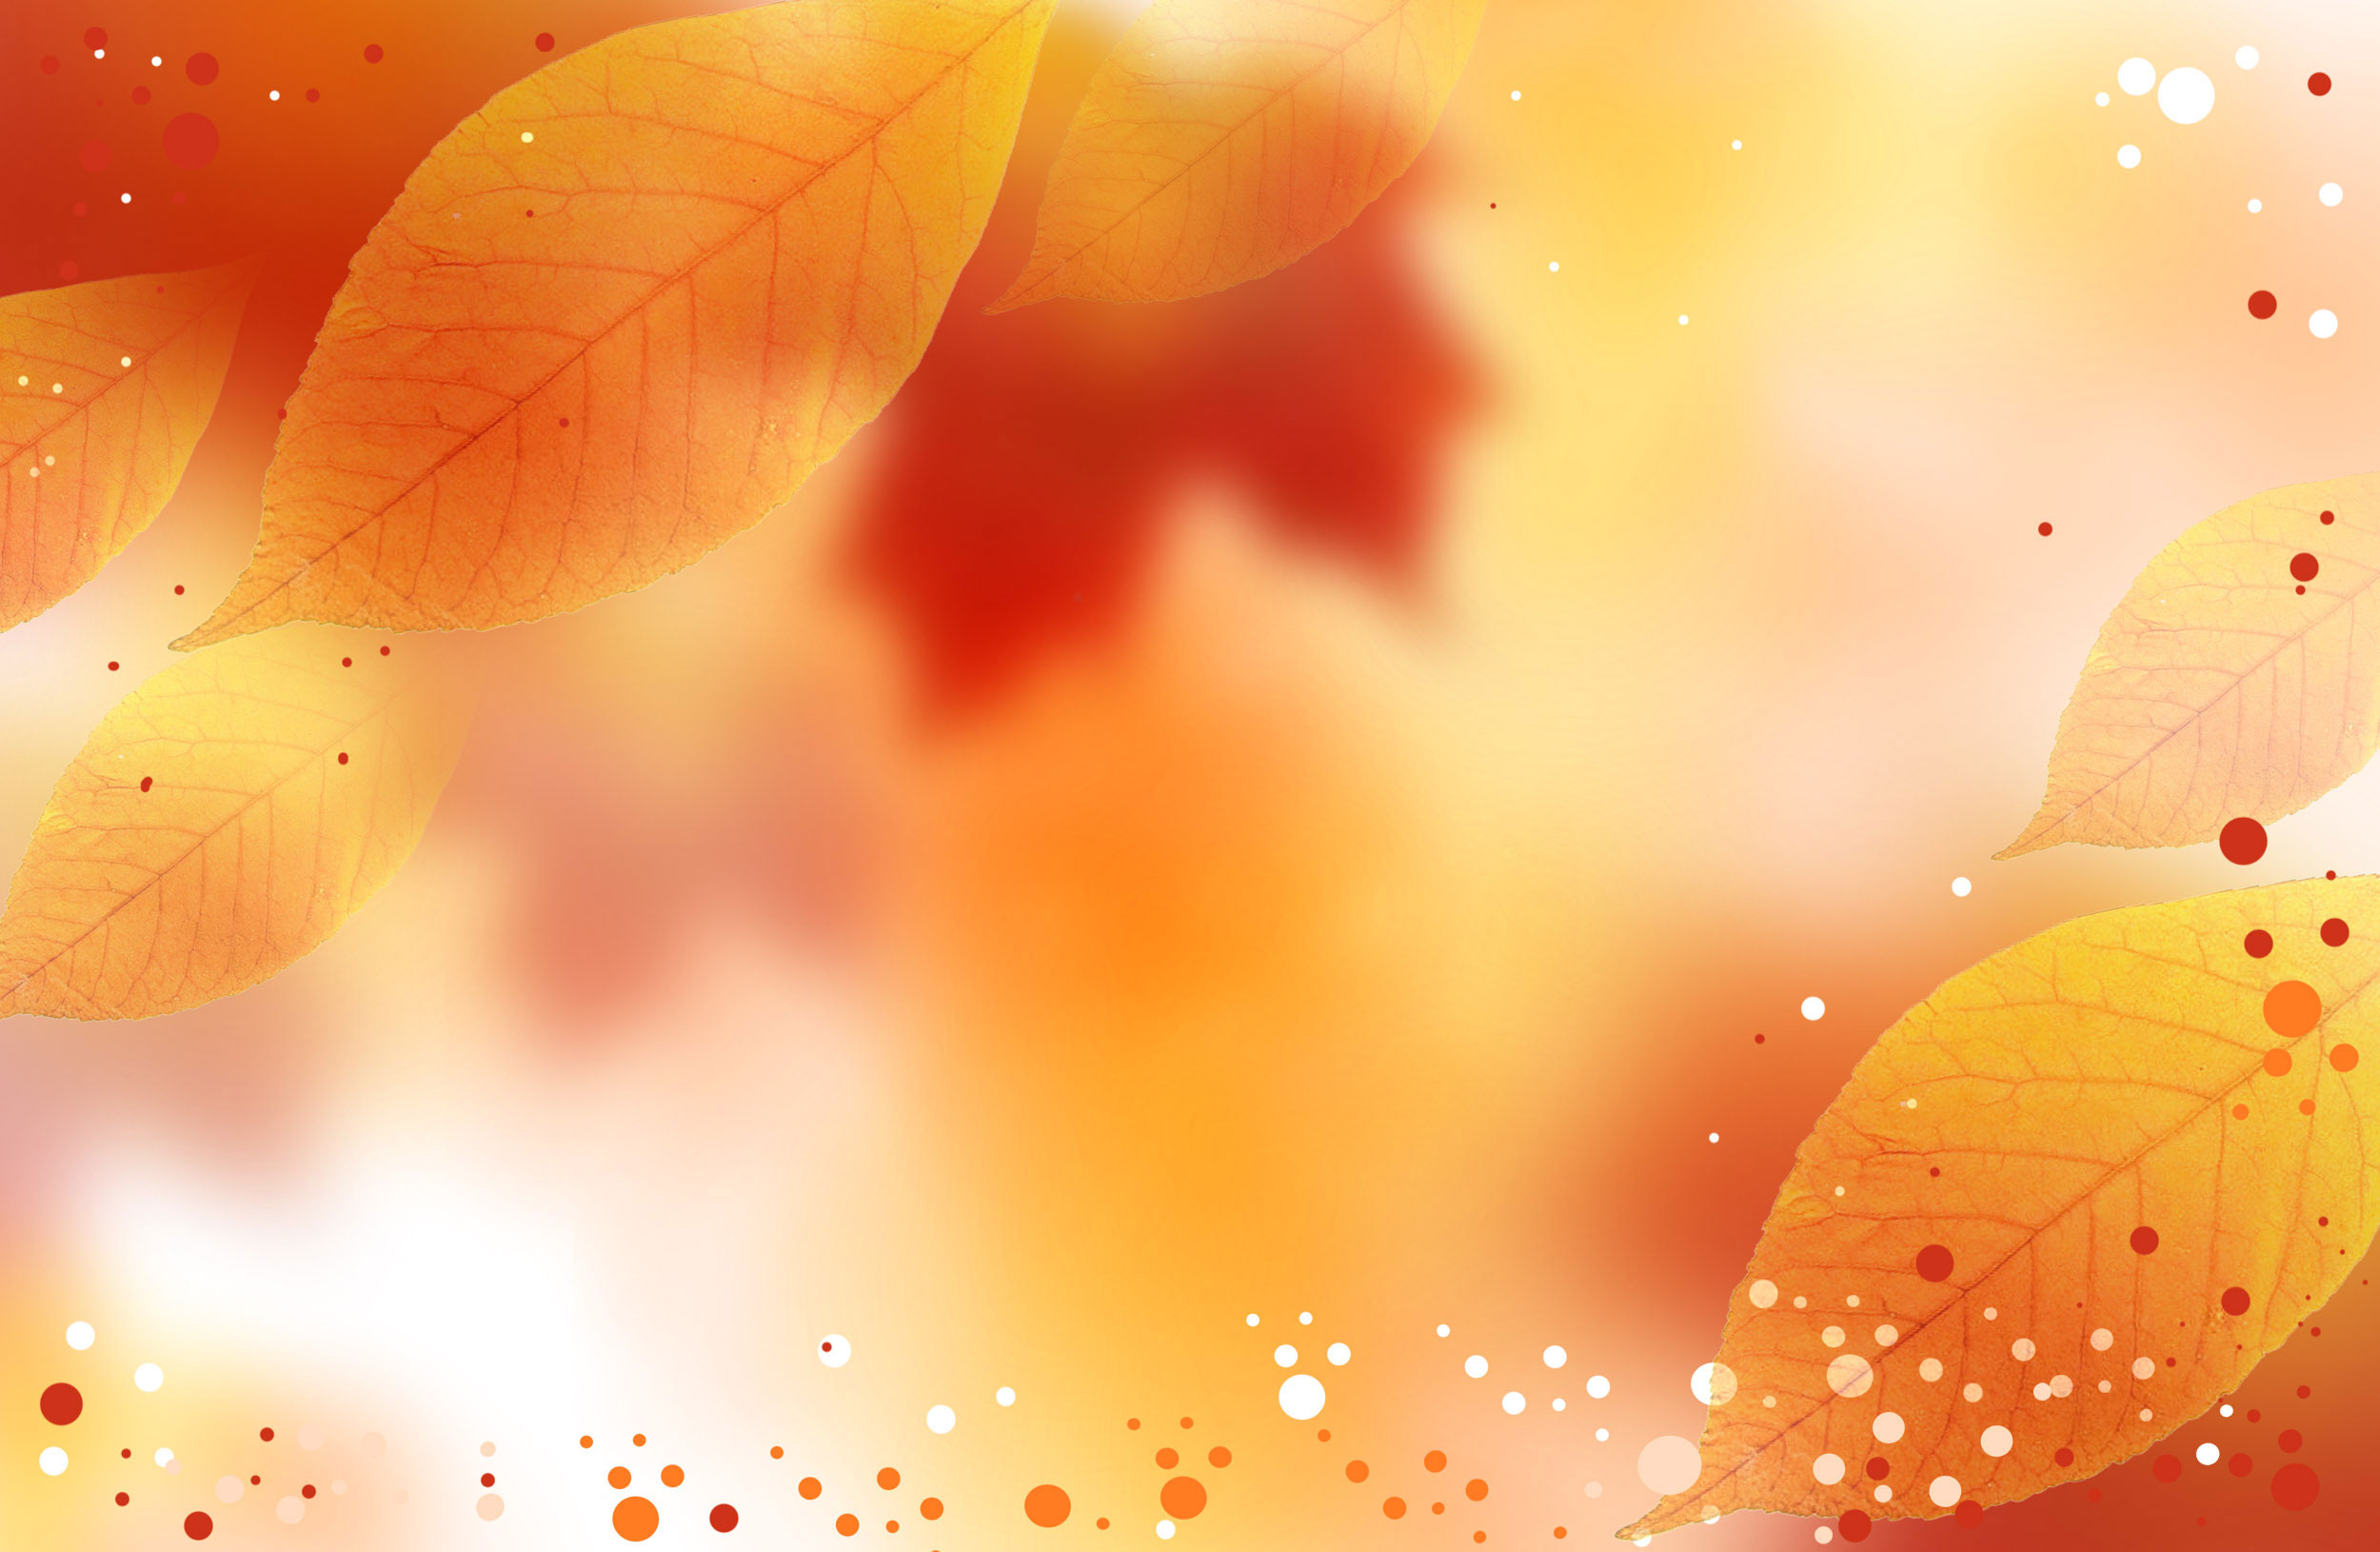 Autumn backgrounds free